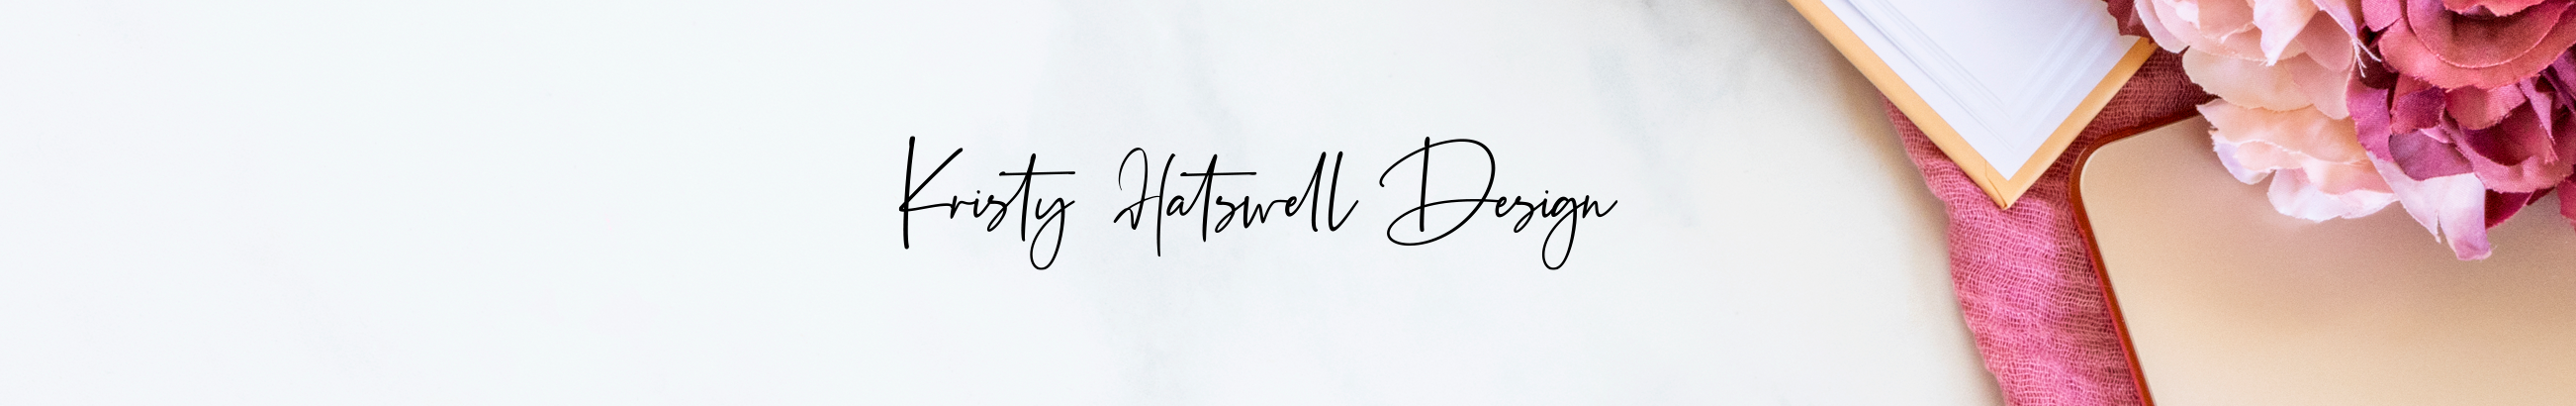 Kristy Hatswell's profile banner